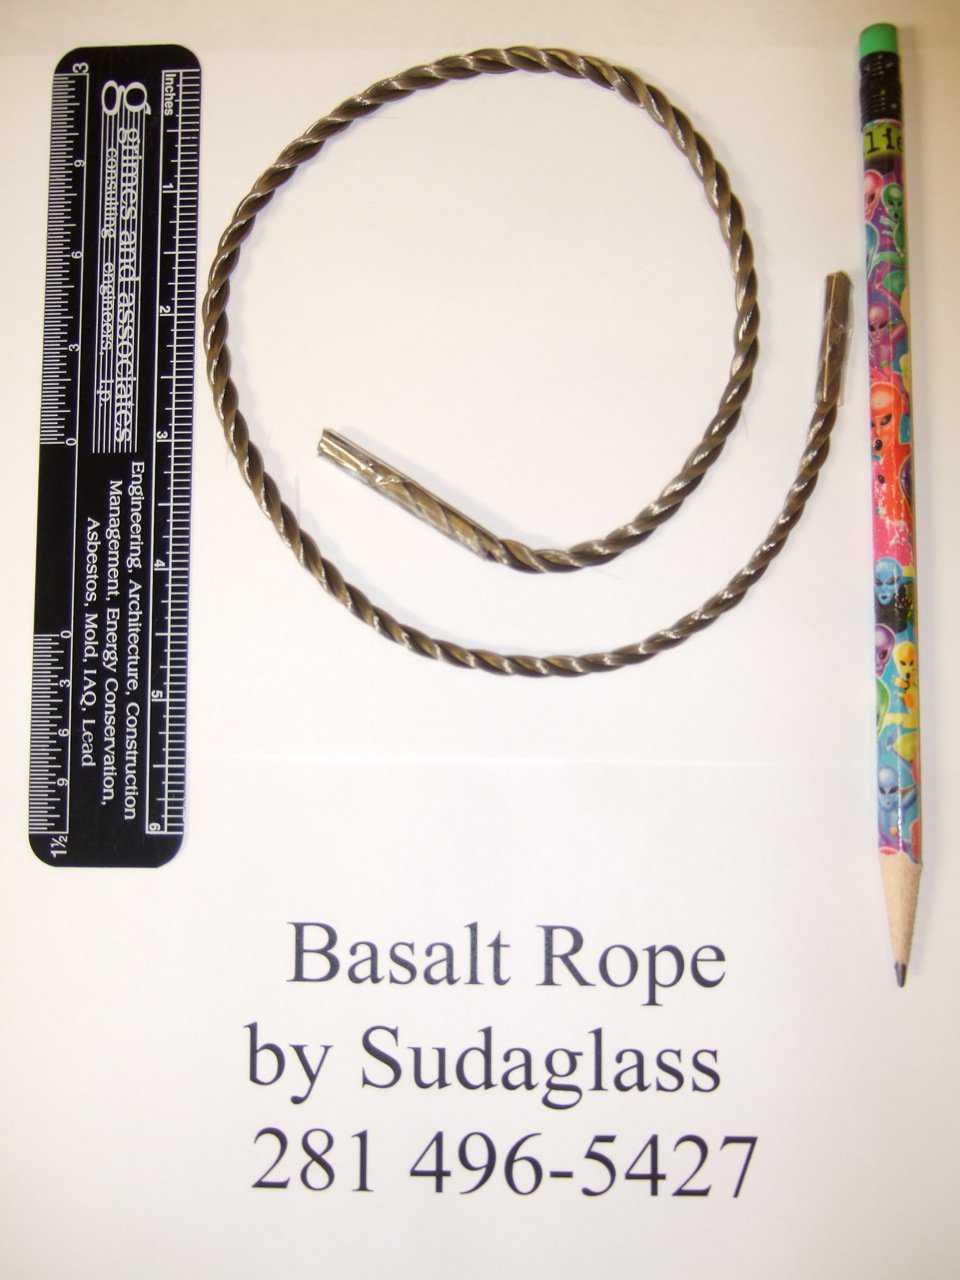 Basalt Rope
After building a few EcoShell Domes with the Basalt Roving we have realized we needed more.  So working with Sudaglass we have come up with this Basalt Rope. It is easier to handle and is just right for the EcoShell Domes. The rope is equal to 3/4 of a 4 mm bar. It comes in 10 kilo (22 lbs) rolls. Two rolls will build a 6 meter (20 ft) diameter EcoShell. This is a great home or storage. Basalt Rope for use in the construction of EcoShell I domes. It is easy to handle and to ship and far easier to use than the roving.